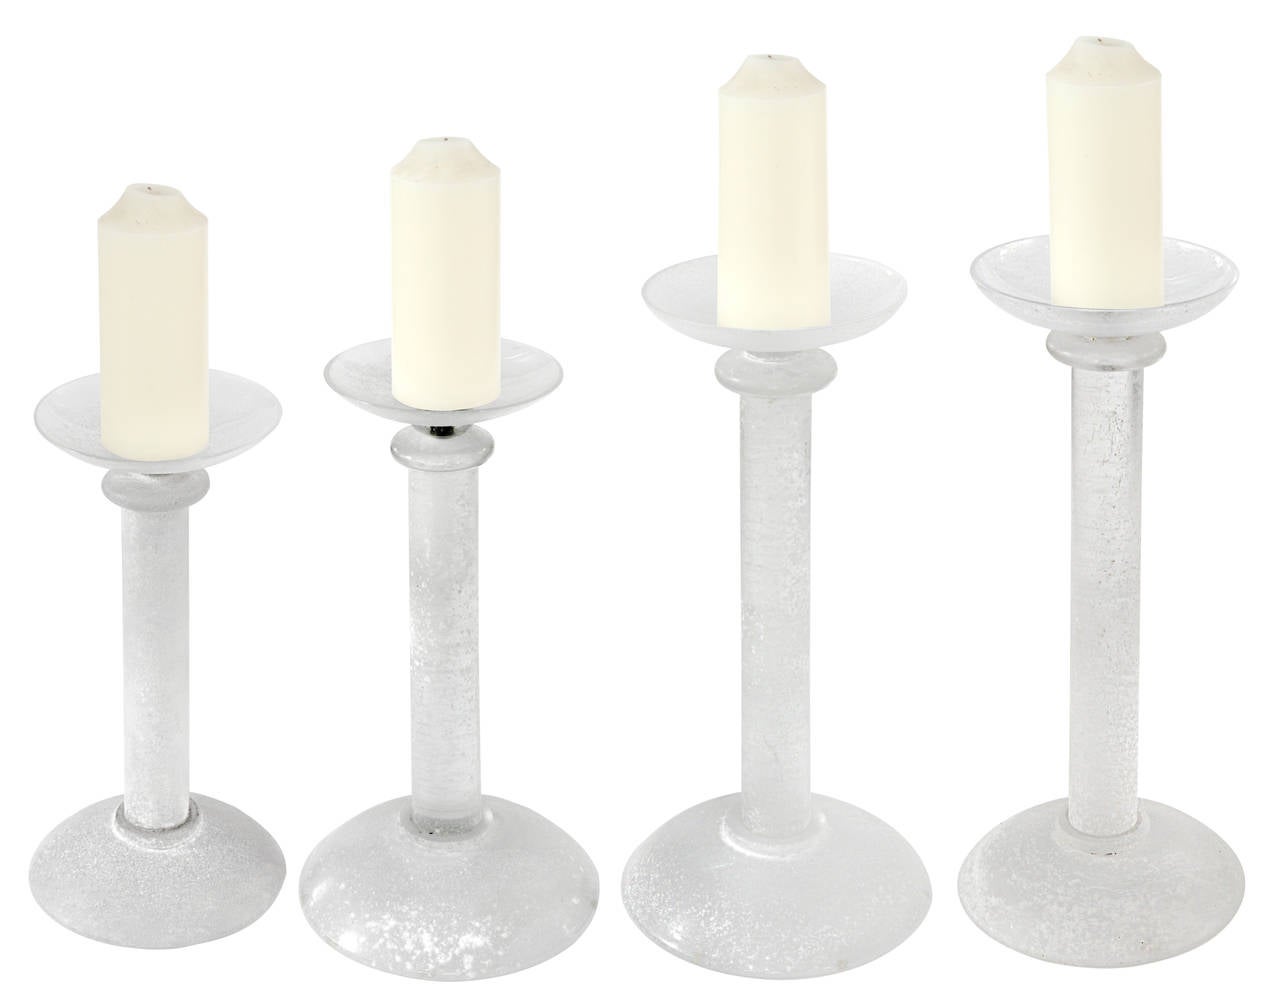 Set of four candleholders in white glass with scavo (rough) finish by Seguso (Murano, Italy) for Karl Springer, American, 1980s.
Signed on bottom “Karl Springer”.
Dimensions:
Smallest candleholder:
14 inches high
8 1/2 inch diameter

Medium